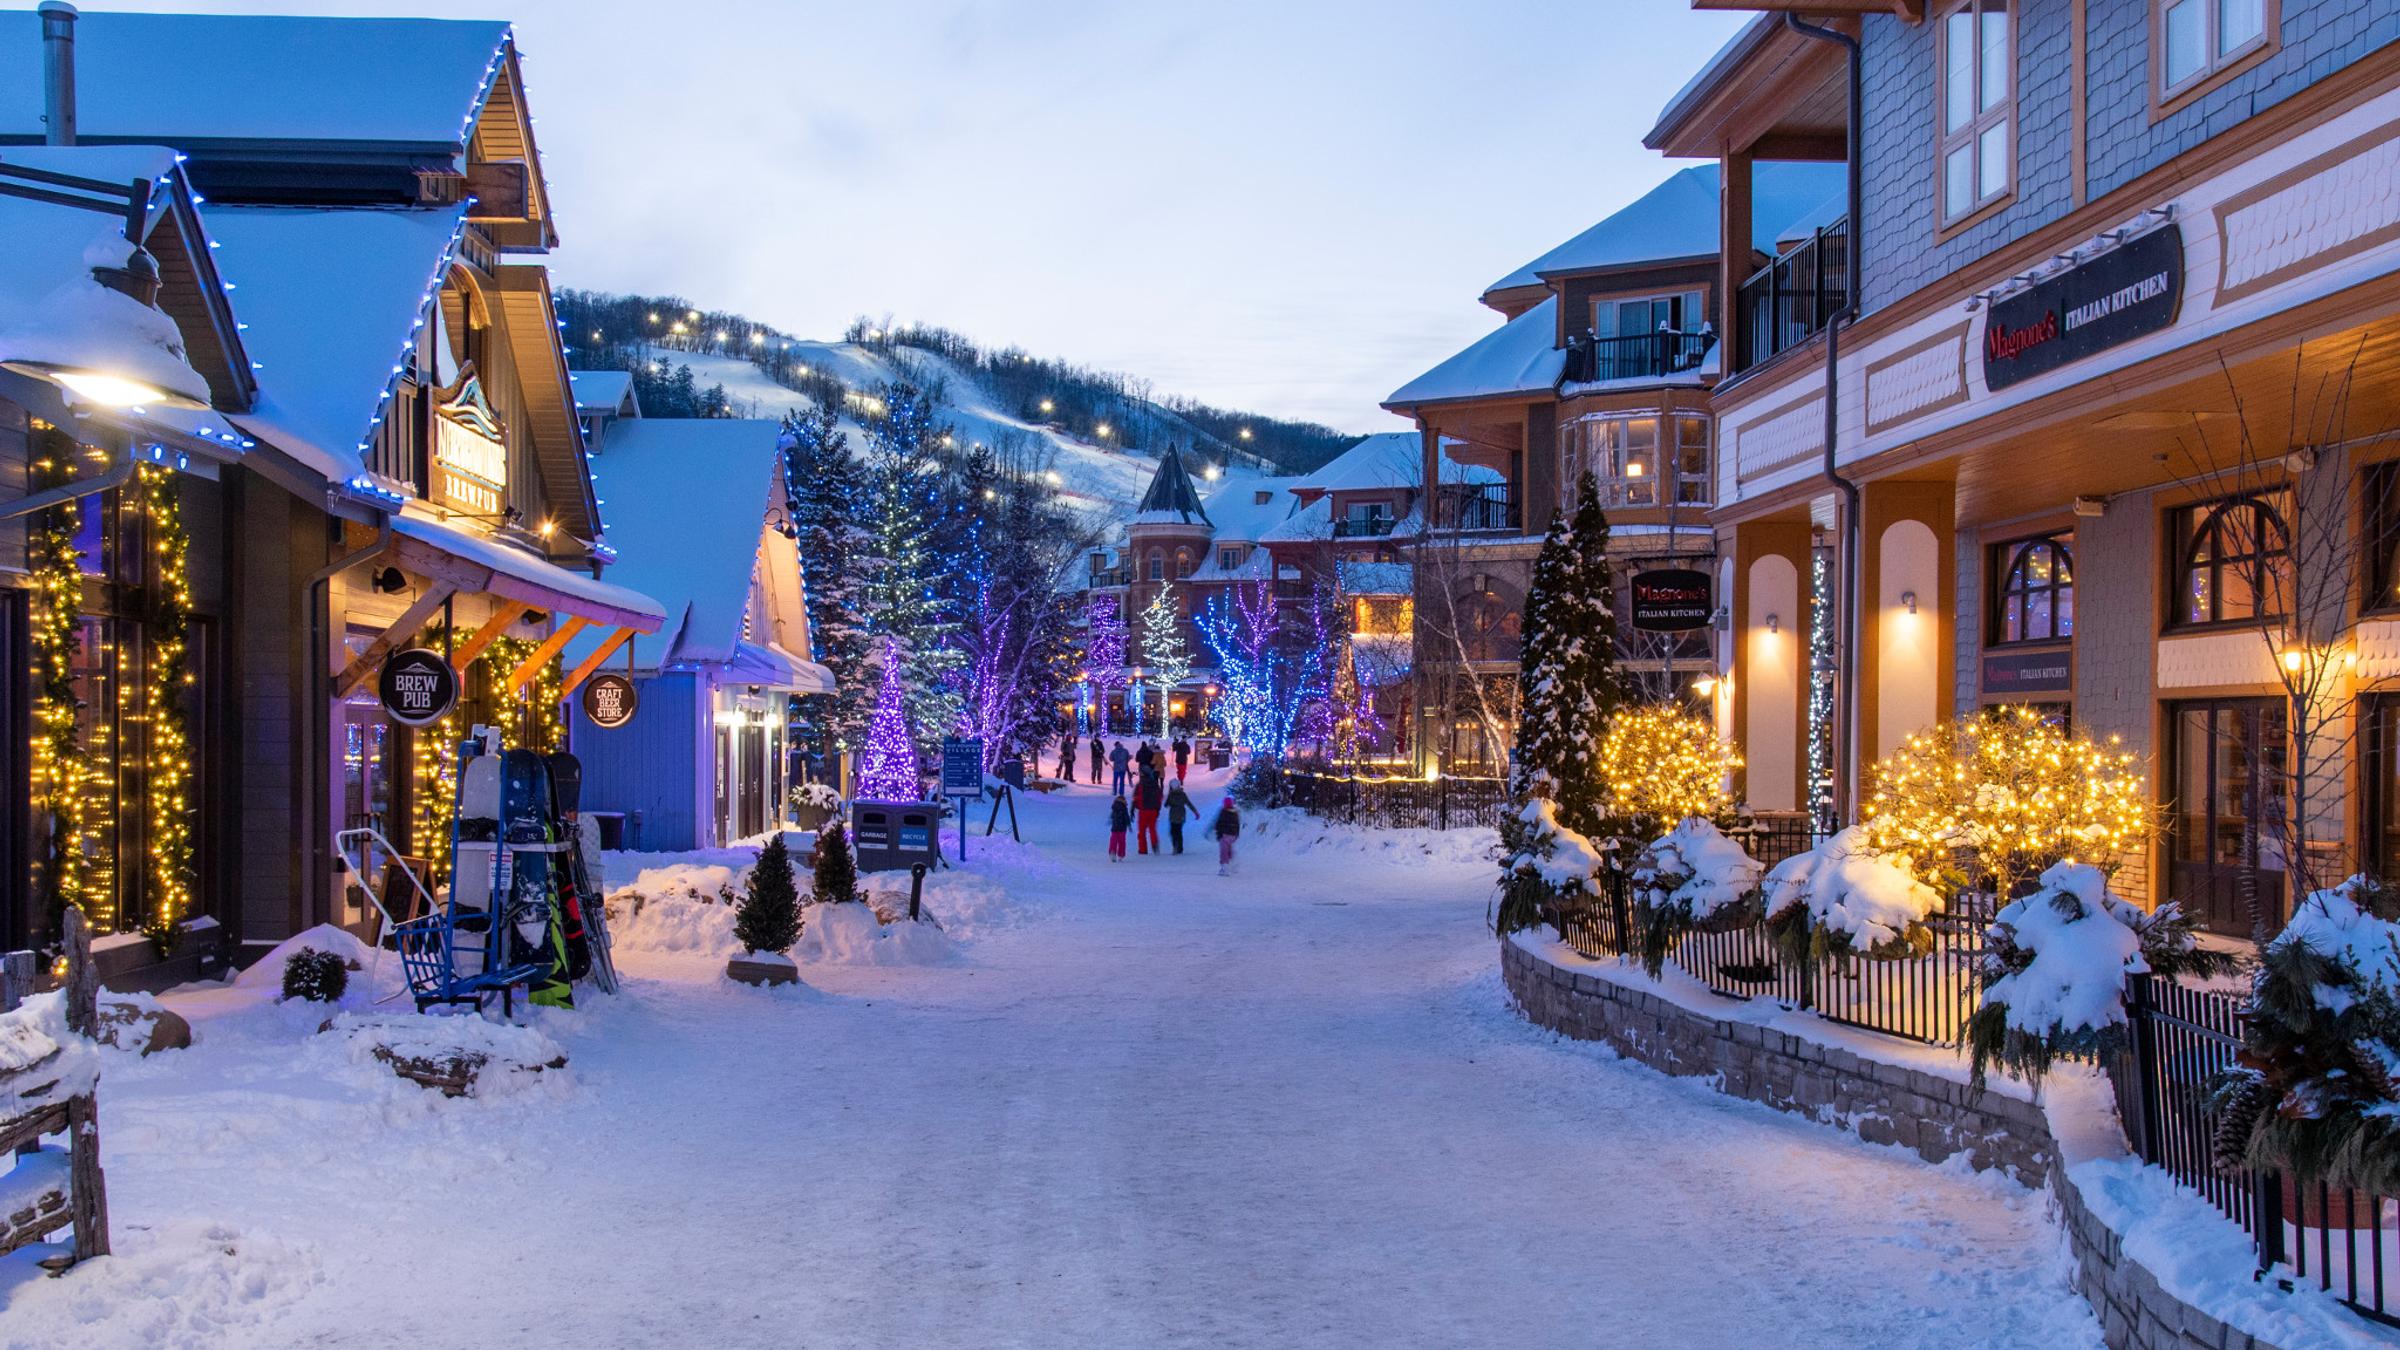 evening exterior of blue mountain resort with snowy streets and little shops all around